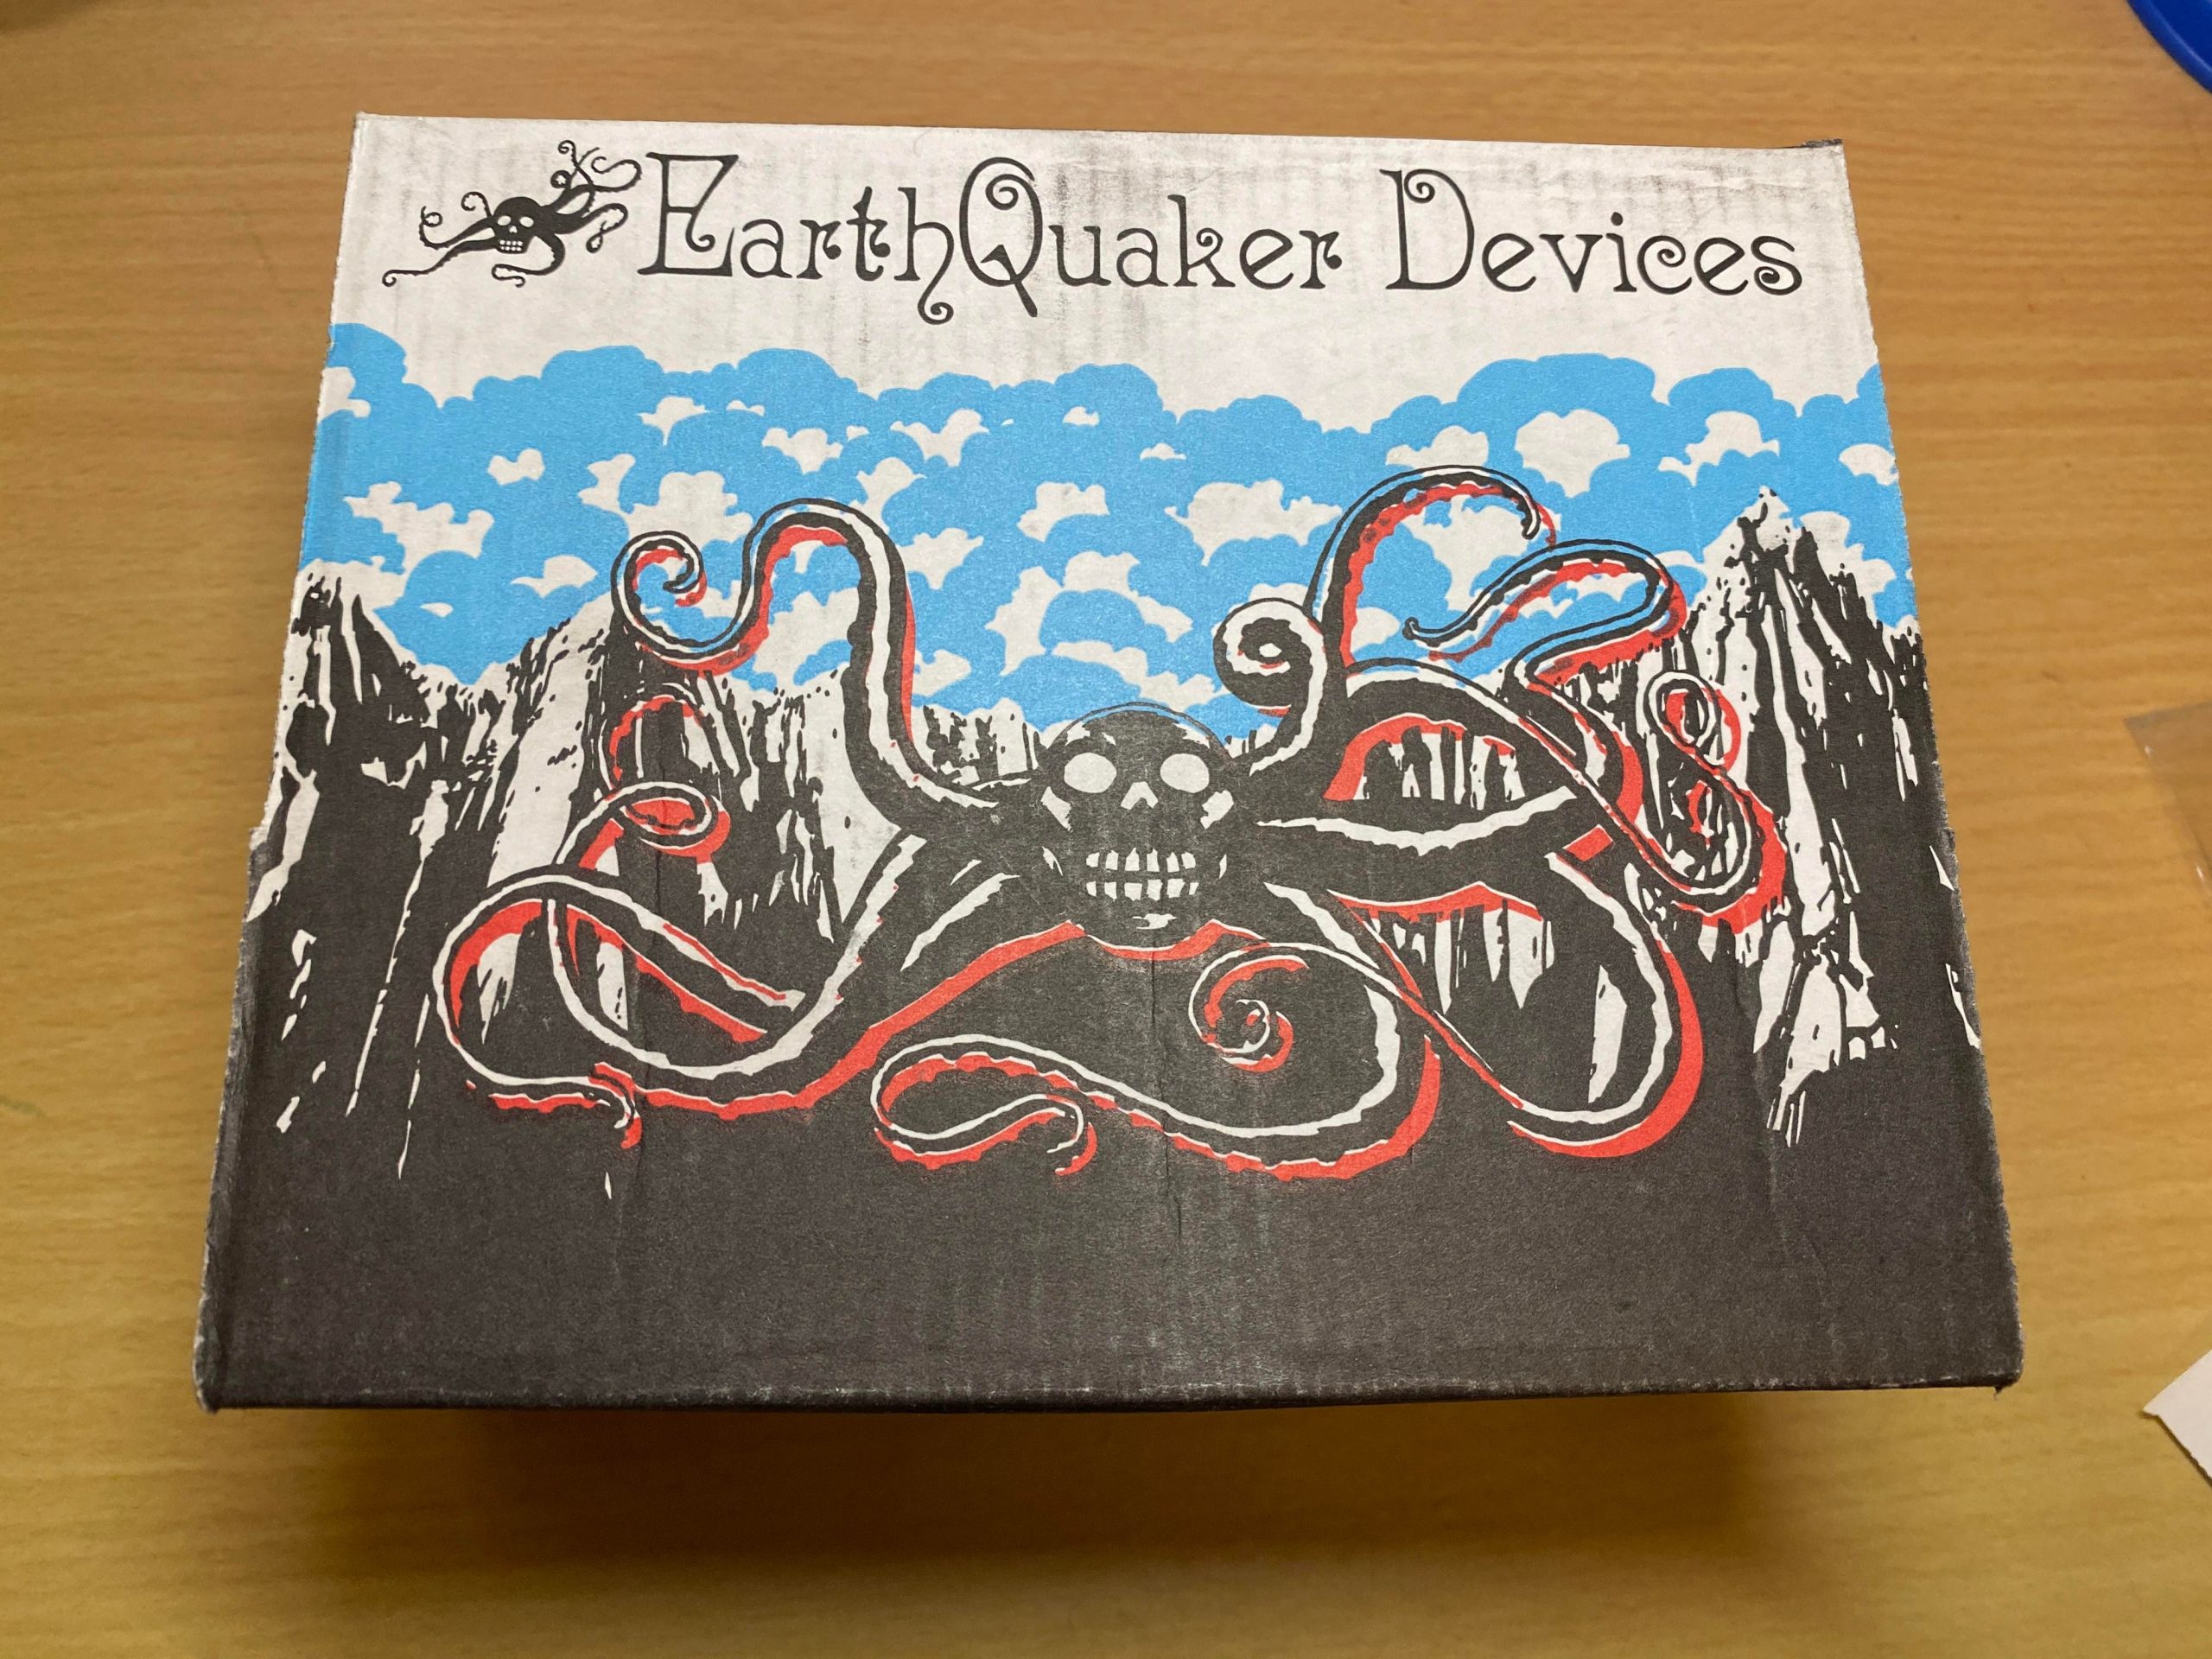 Earthquake Devices Palisades Overdrive